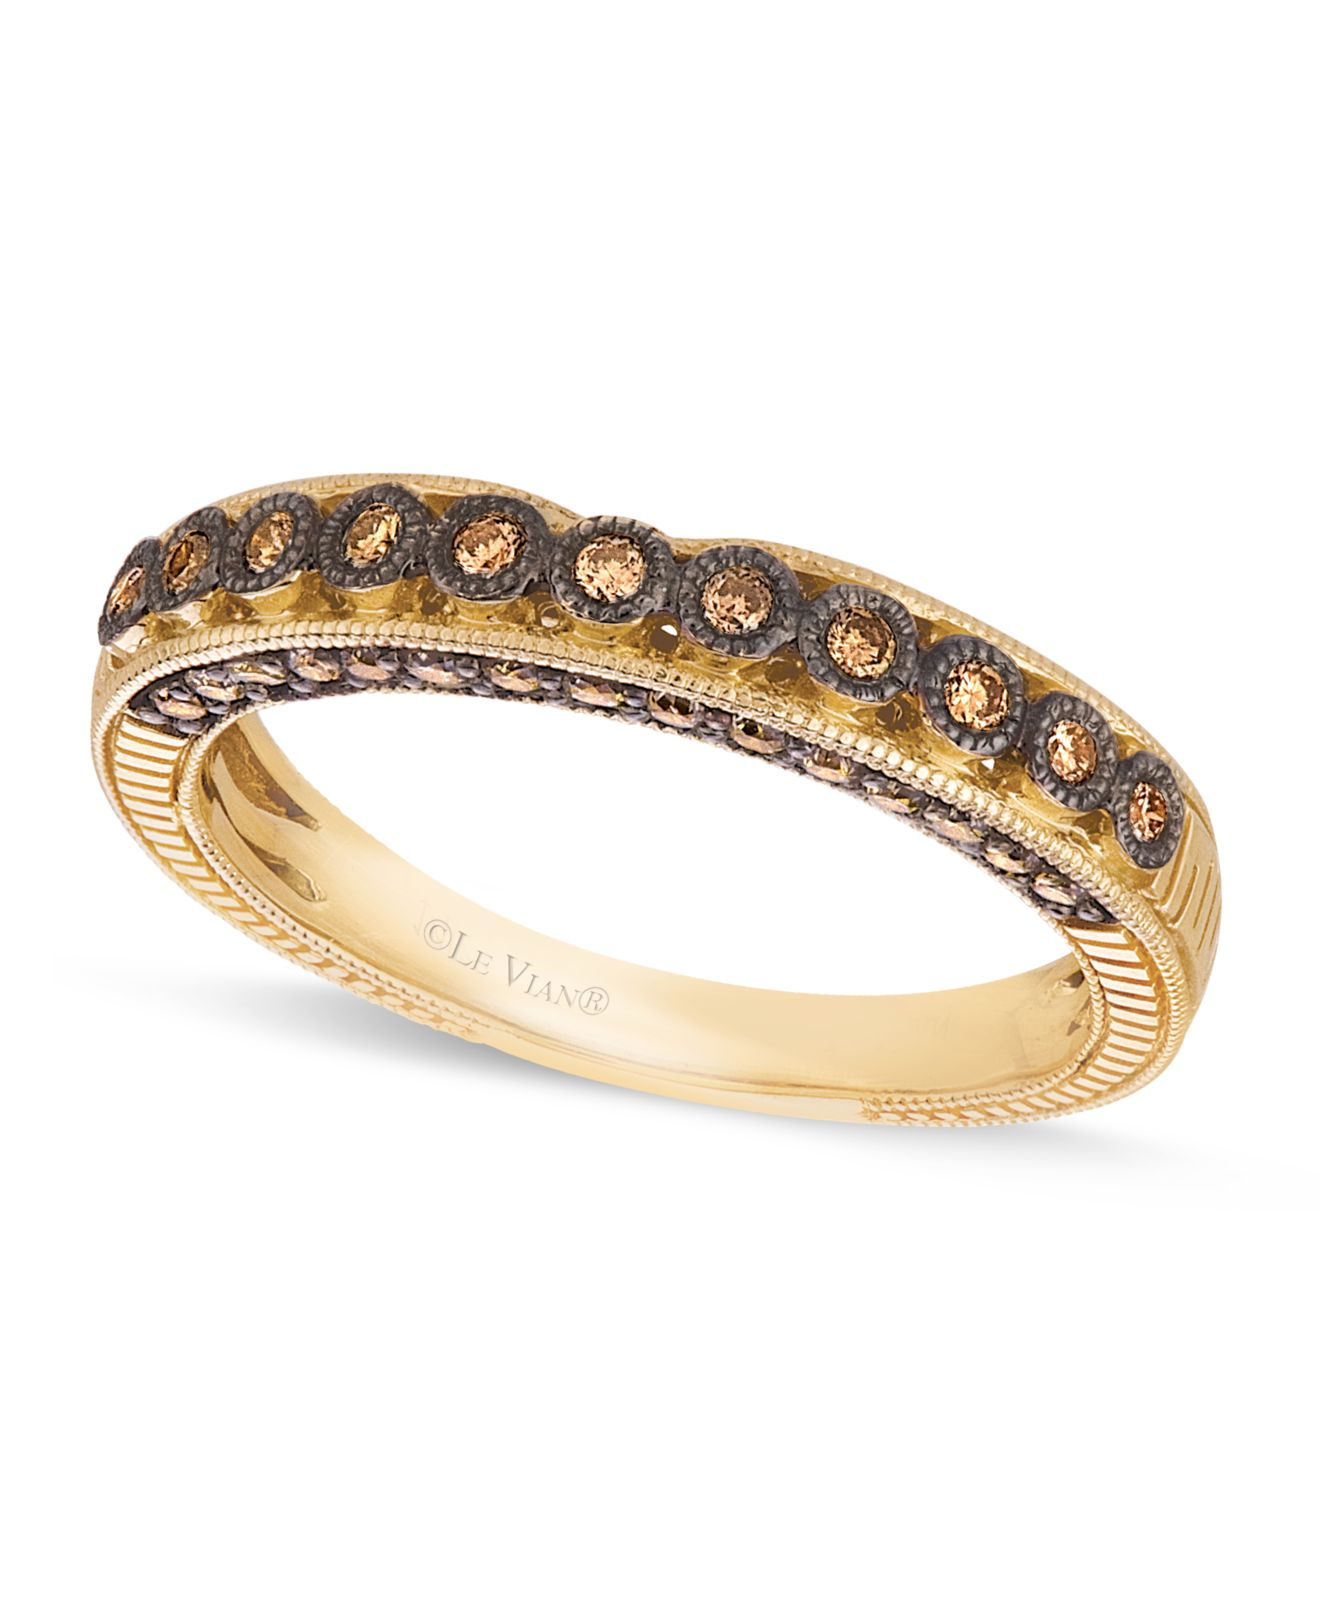 Le Vian Brown Chocolate Diamond Wedding Band 14 C Tw In 14k Gold Product 1 17490386 1 162661556 Normal 